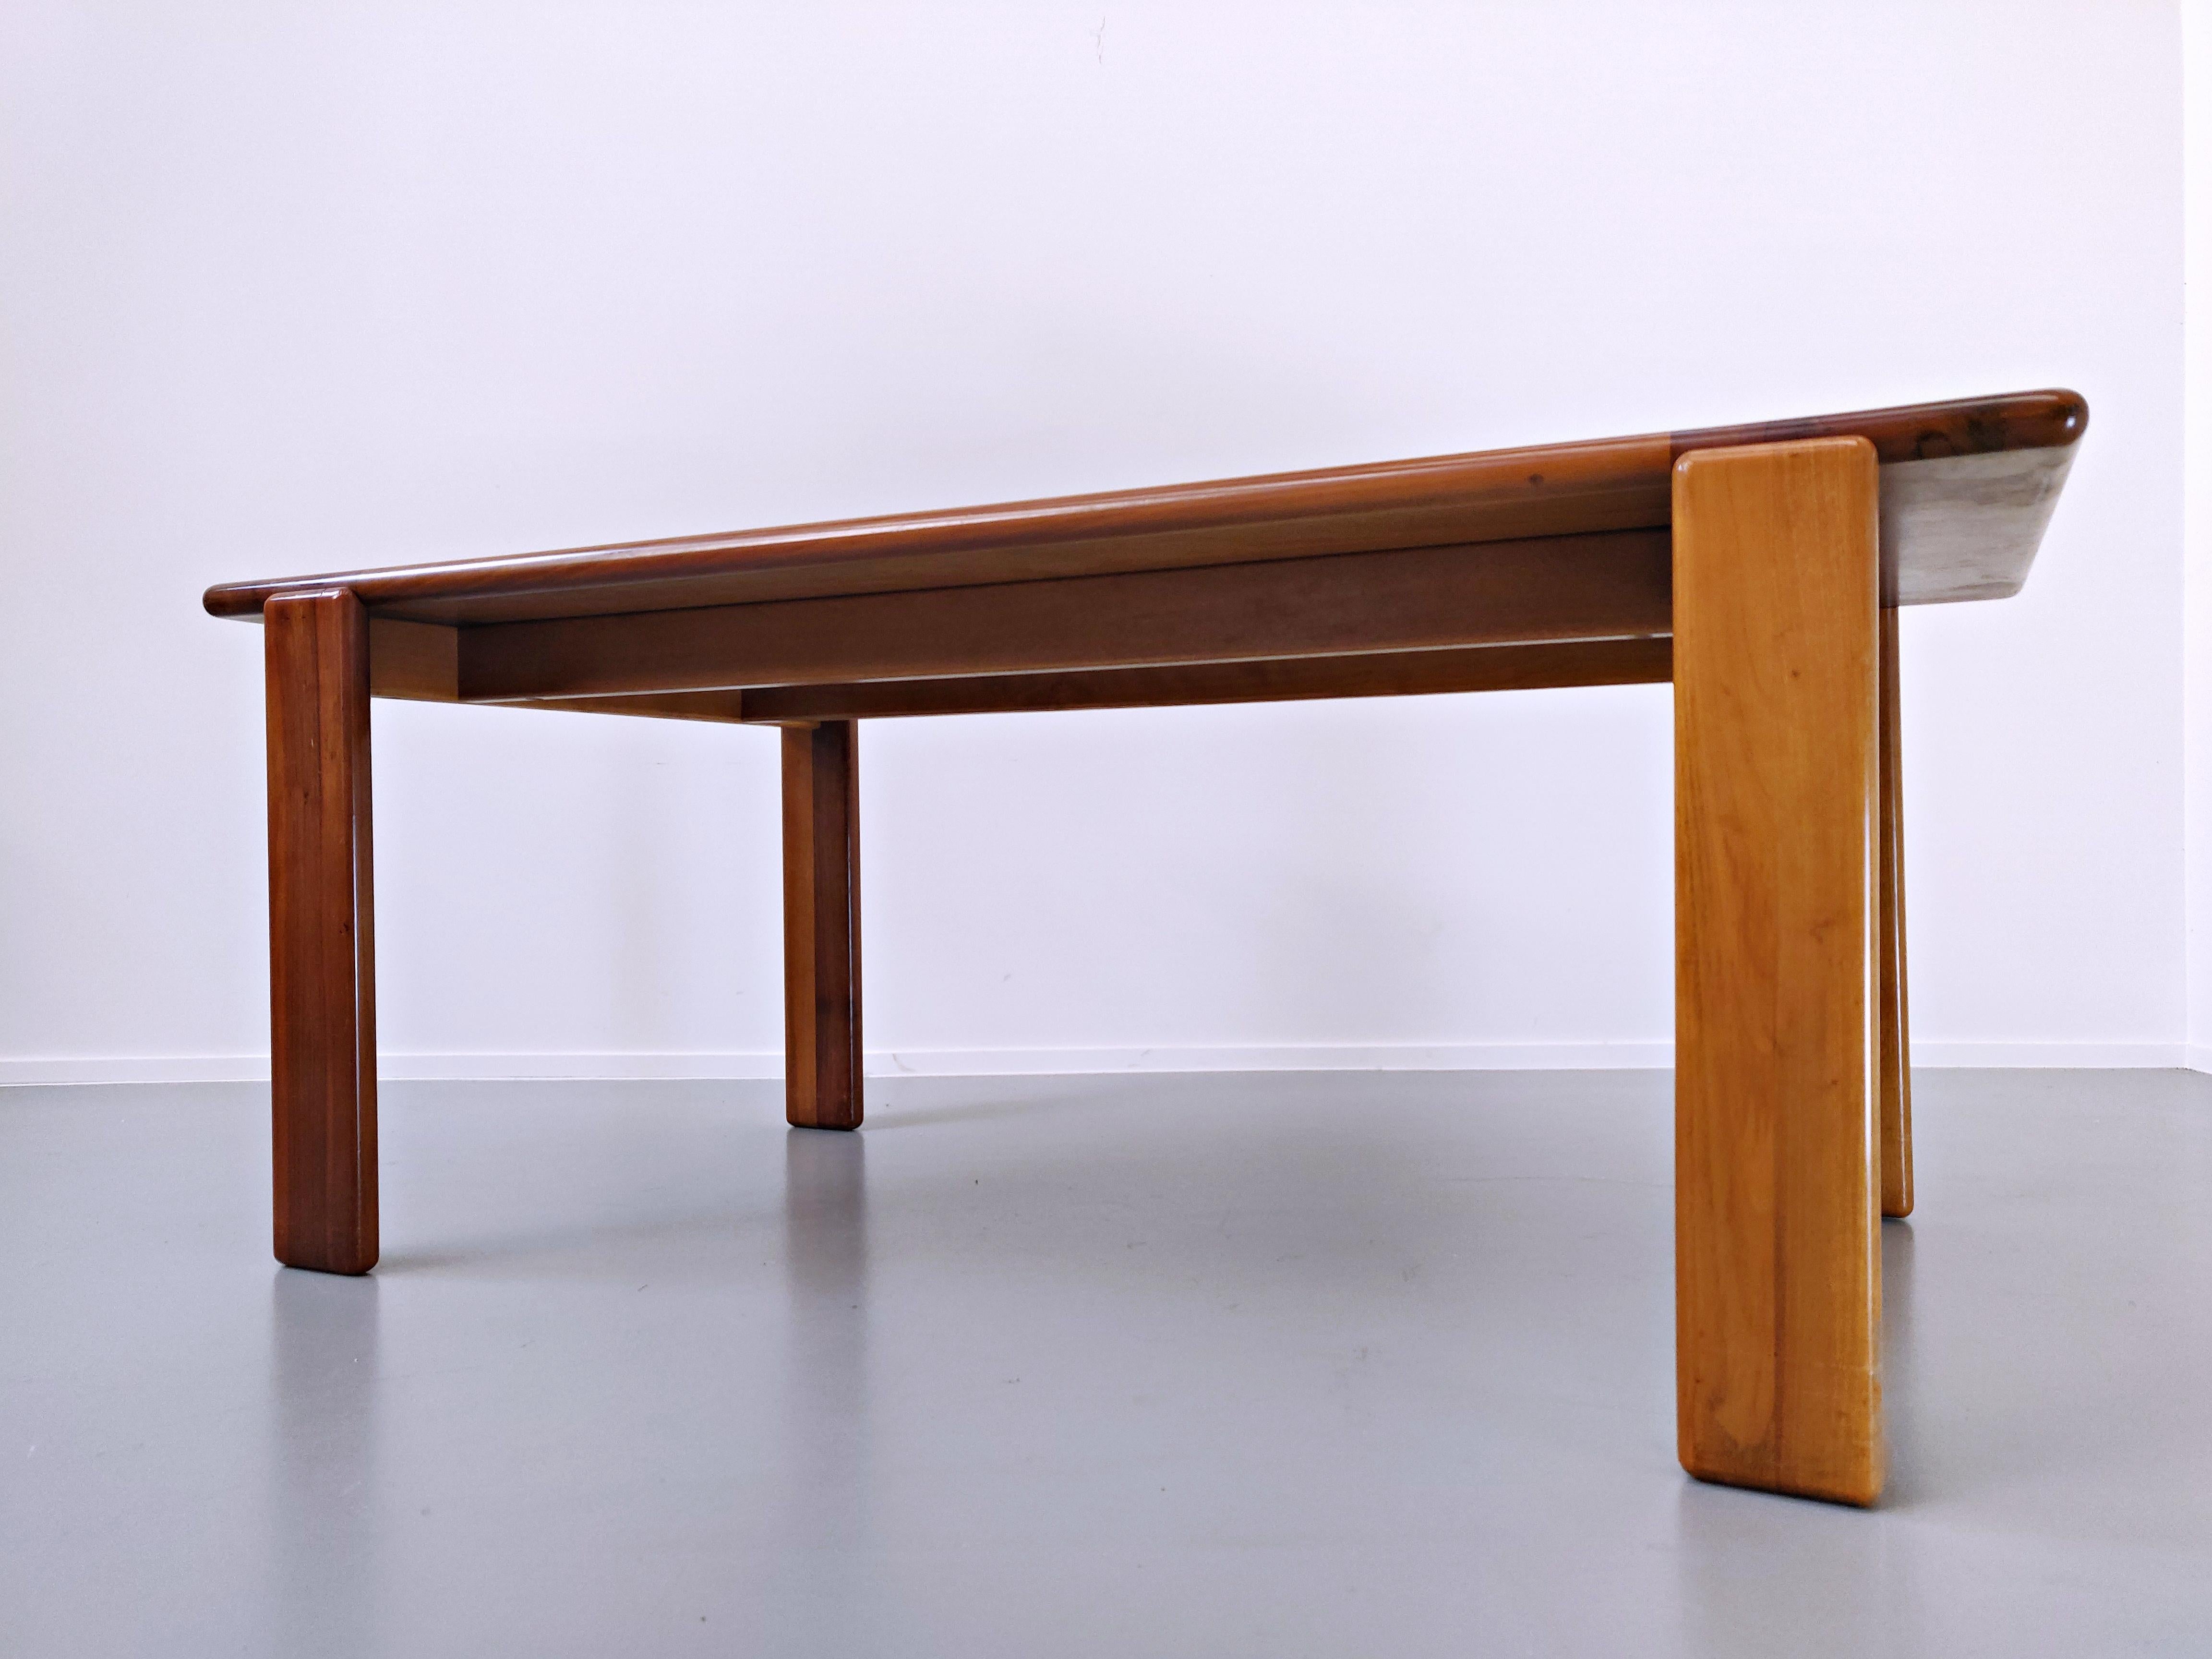 Dining table by Mario Marenco, Italy, 1980s.